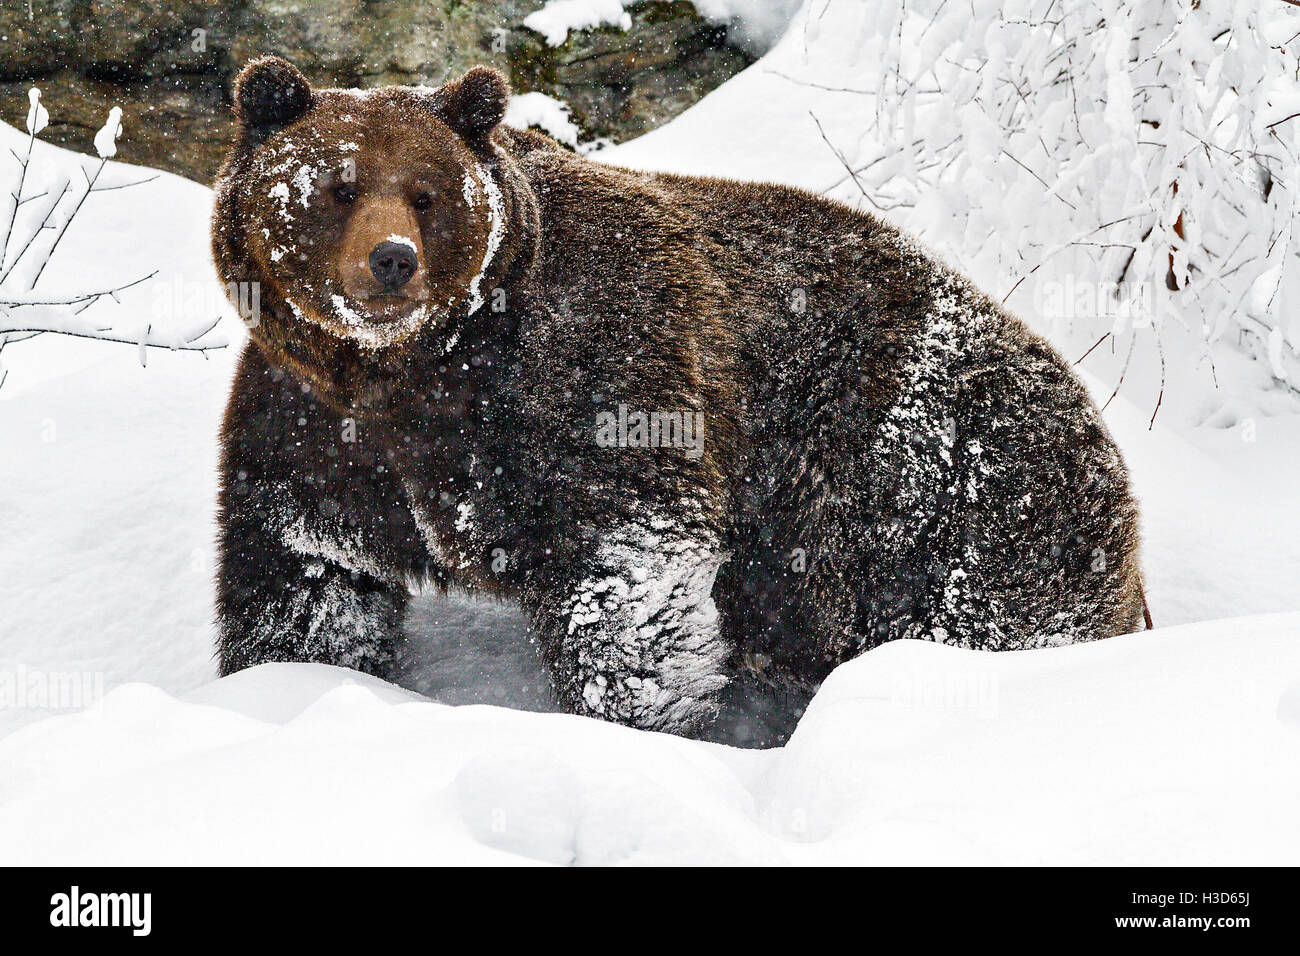 A captive Brown bear (Ursus arctos) covered in snow, Bavarian Forest, Germany Stock Photo